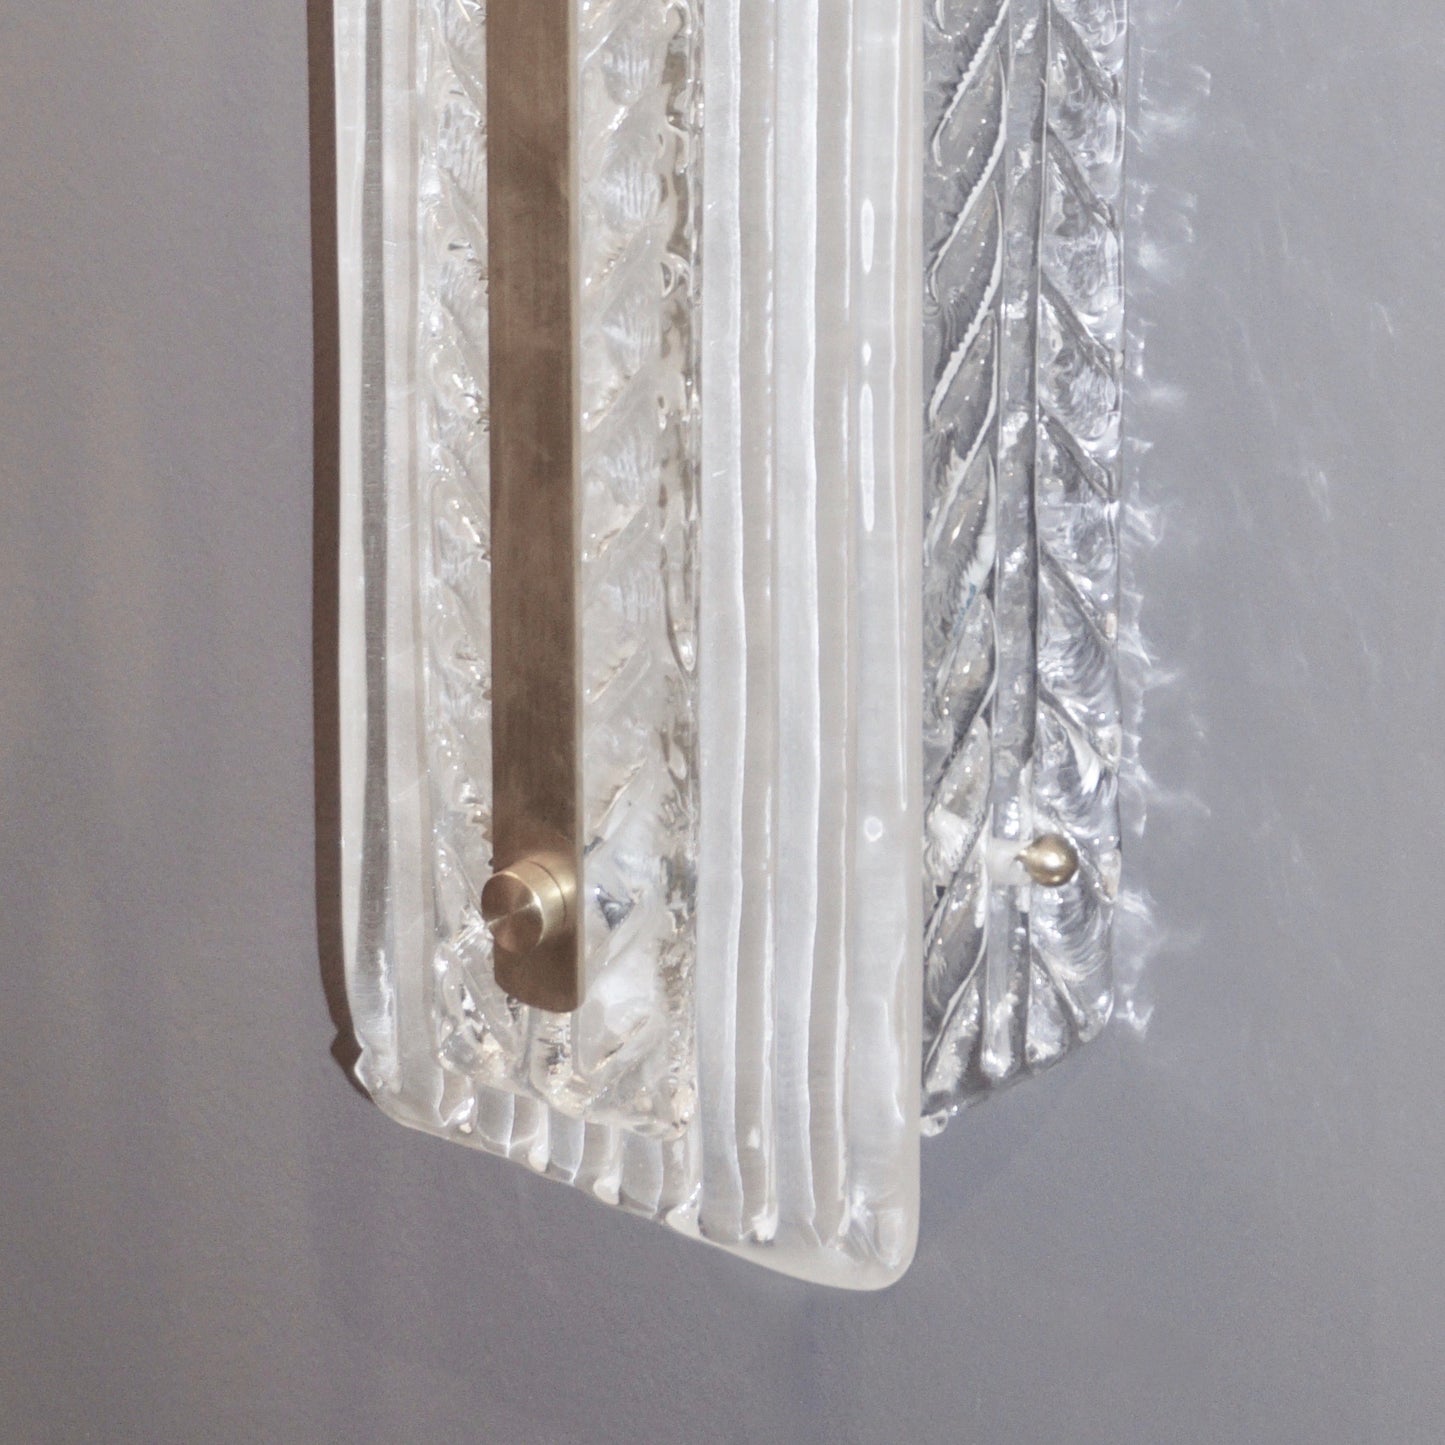 Italian Modern Pair Tall White Crystal Leaf Textured Murano Glass Nickel Sconces